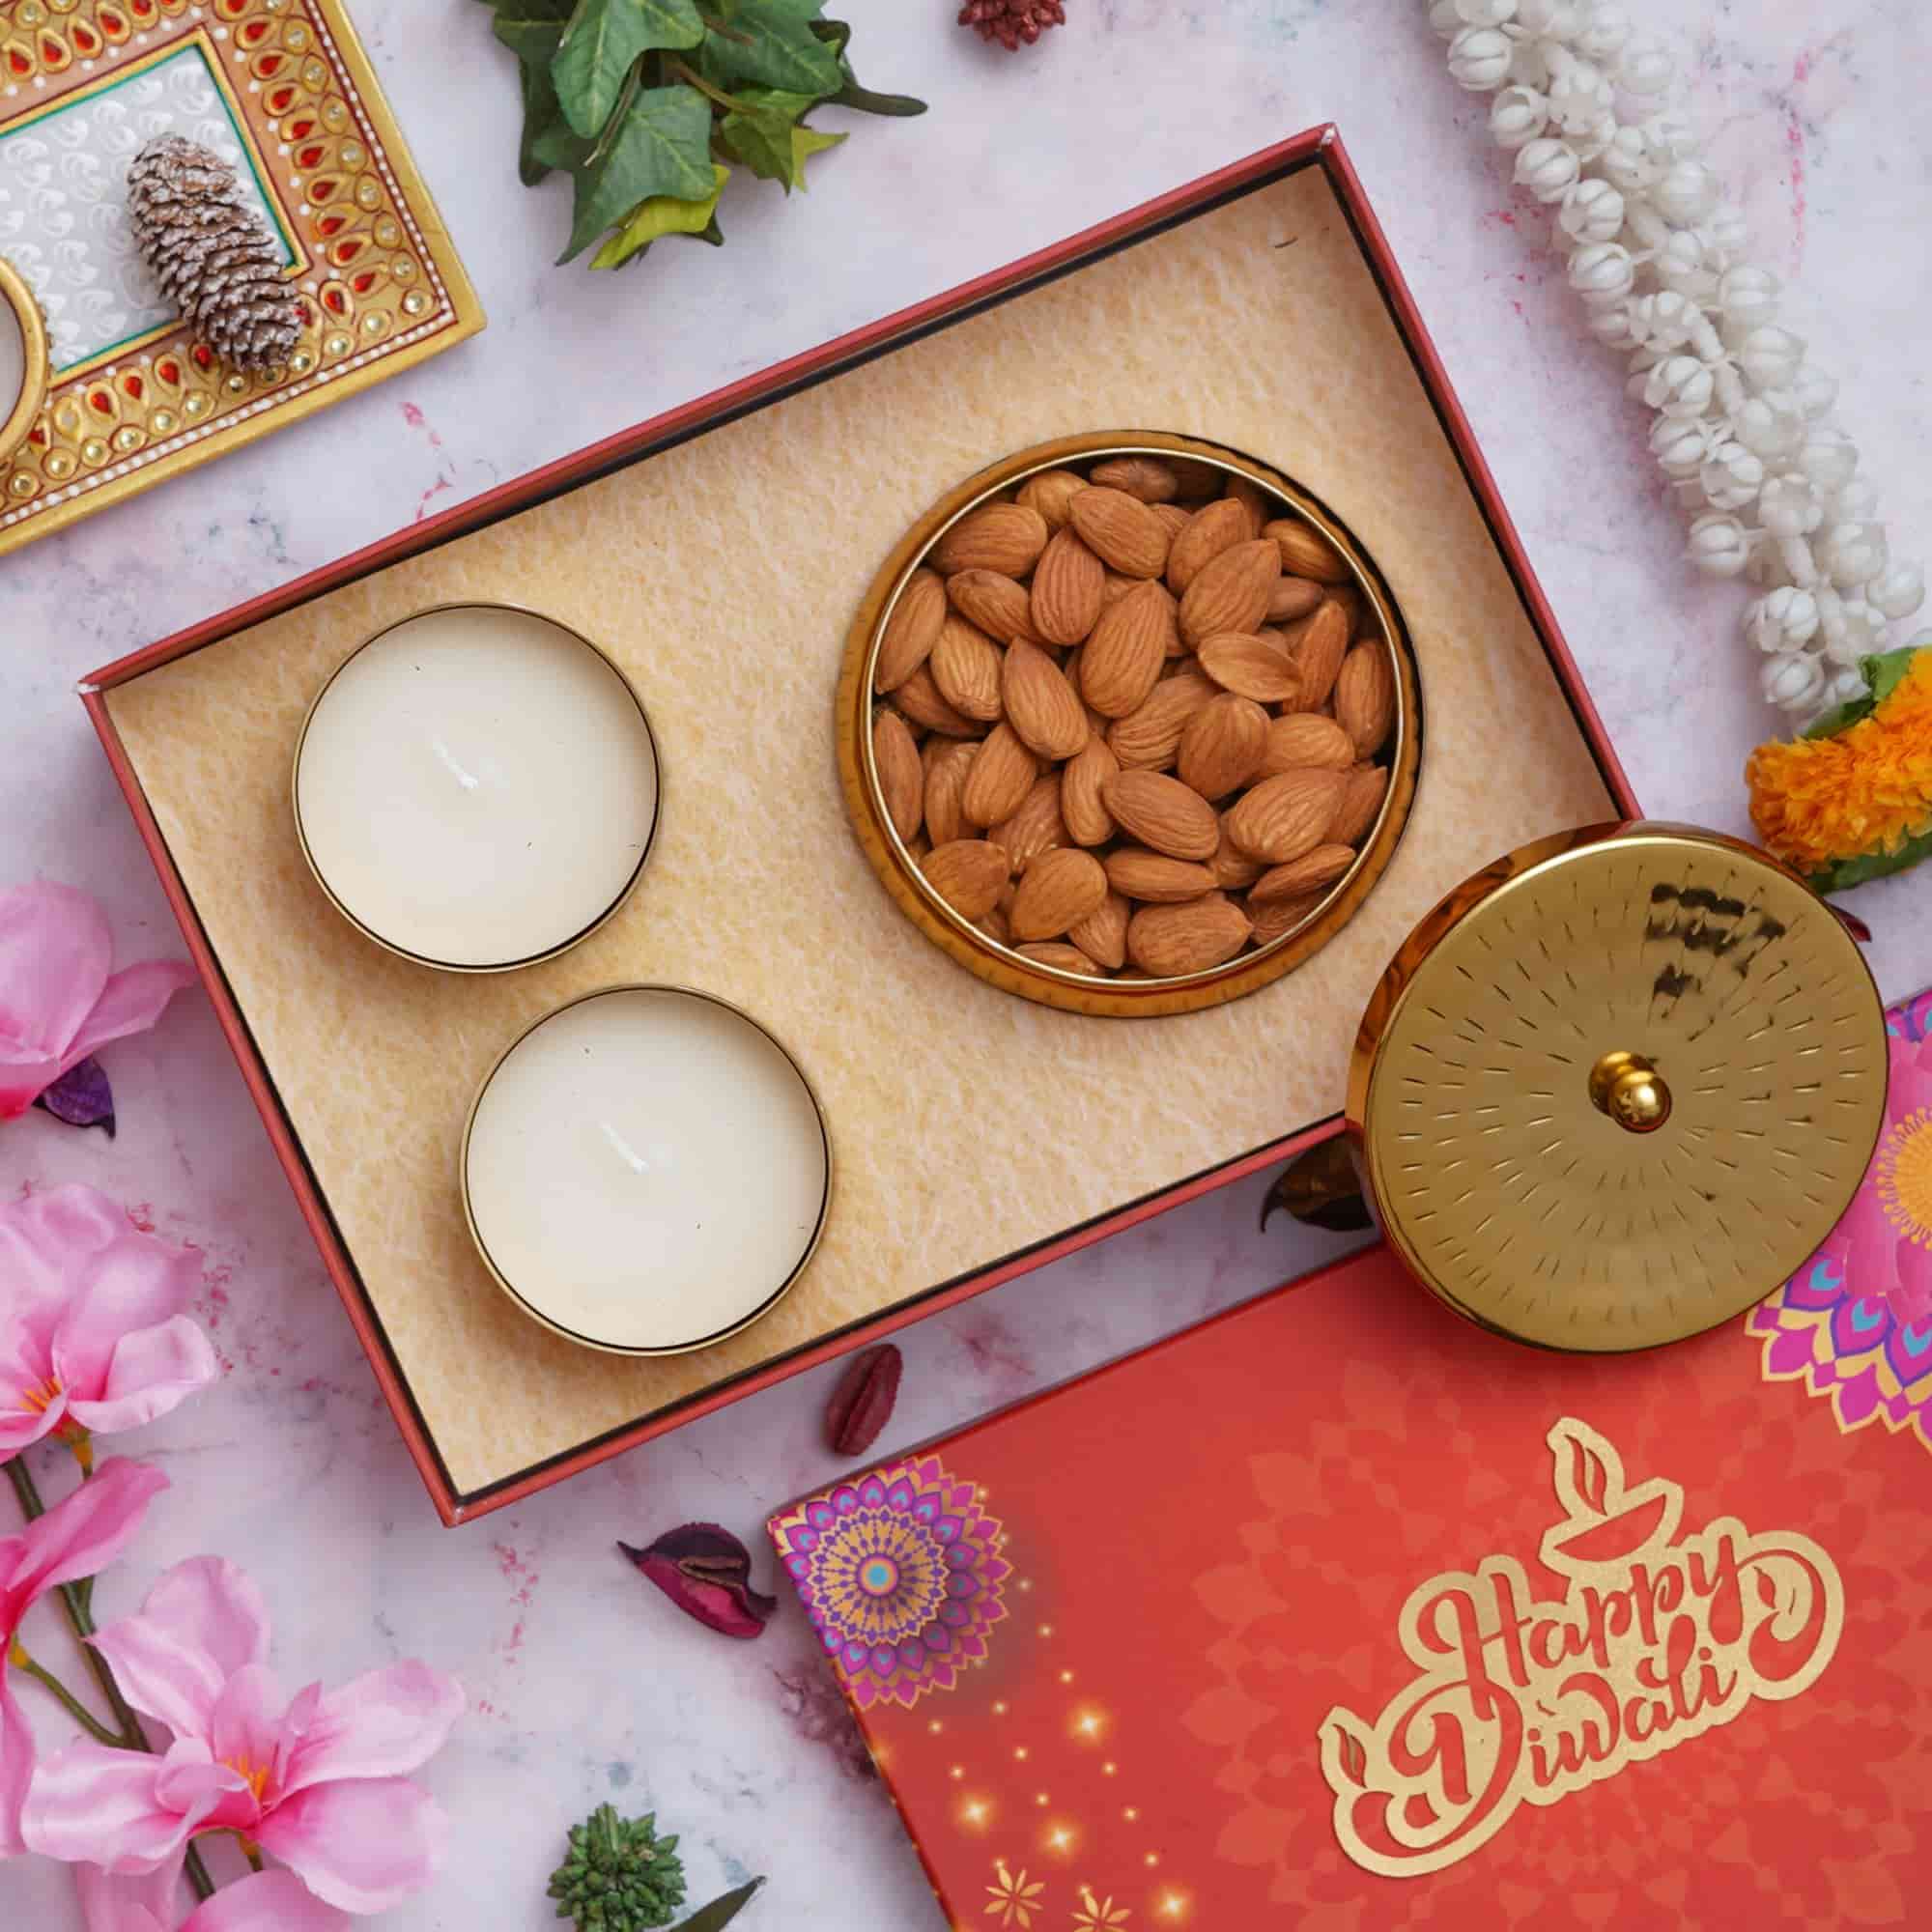 25 Thoughtful Diwali Gifts for Friends and Family - FlowerAdvisor USA Blog